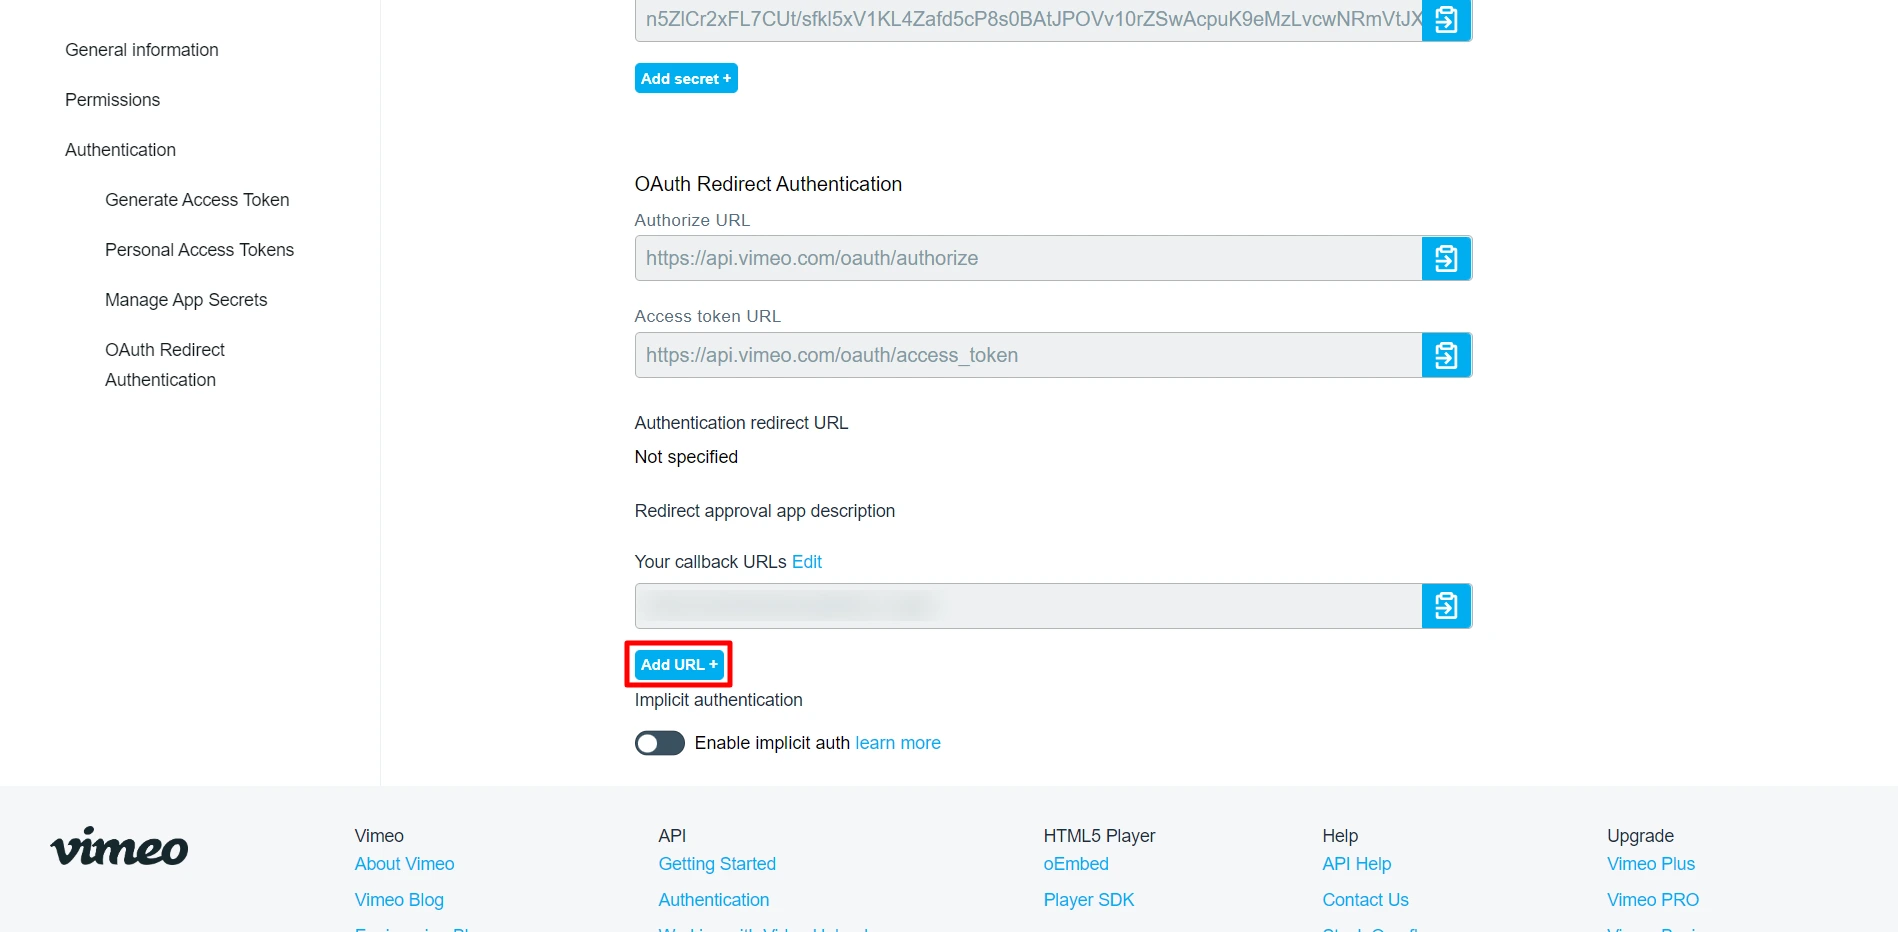 Under OAuth Redirect Authentication add callback urls from here